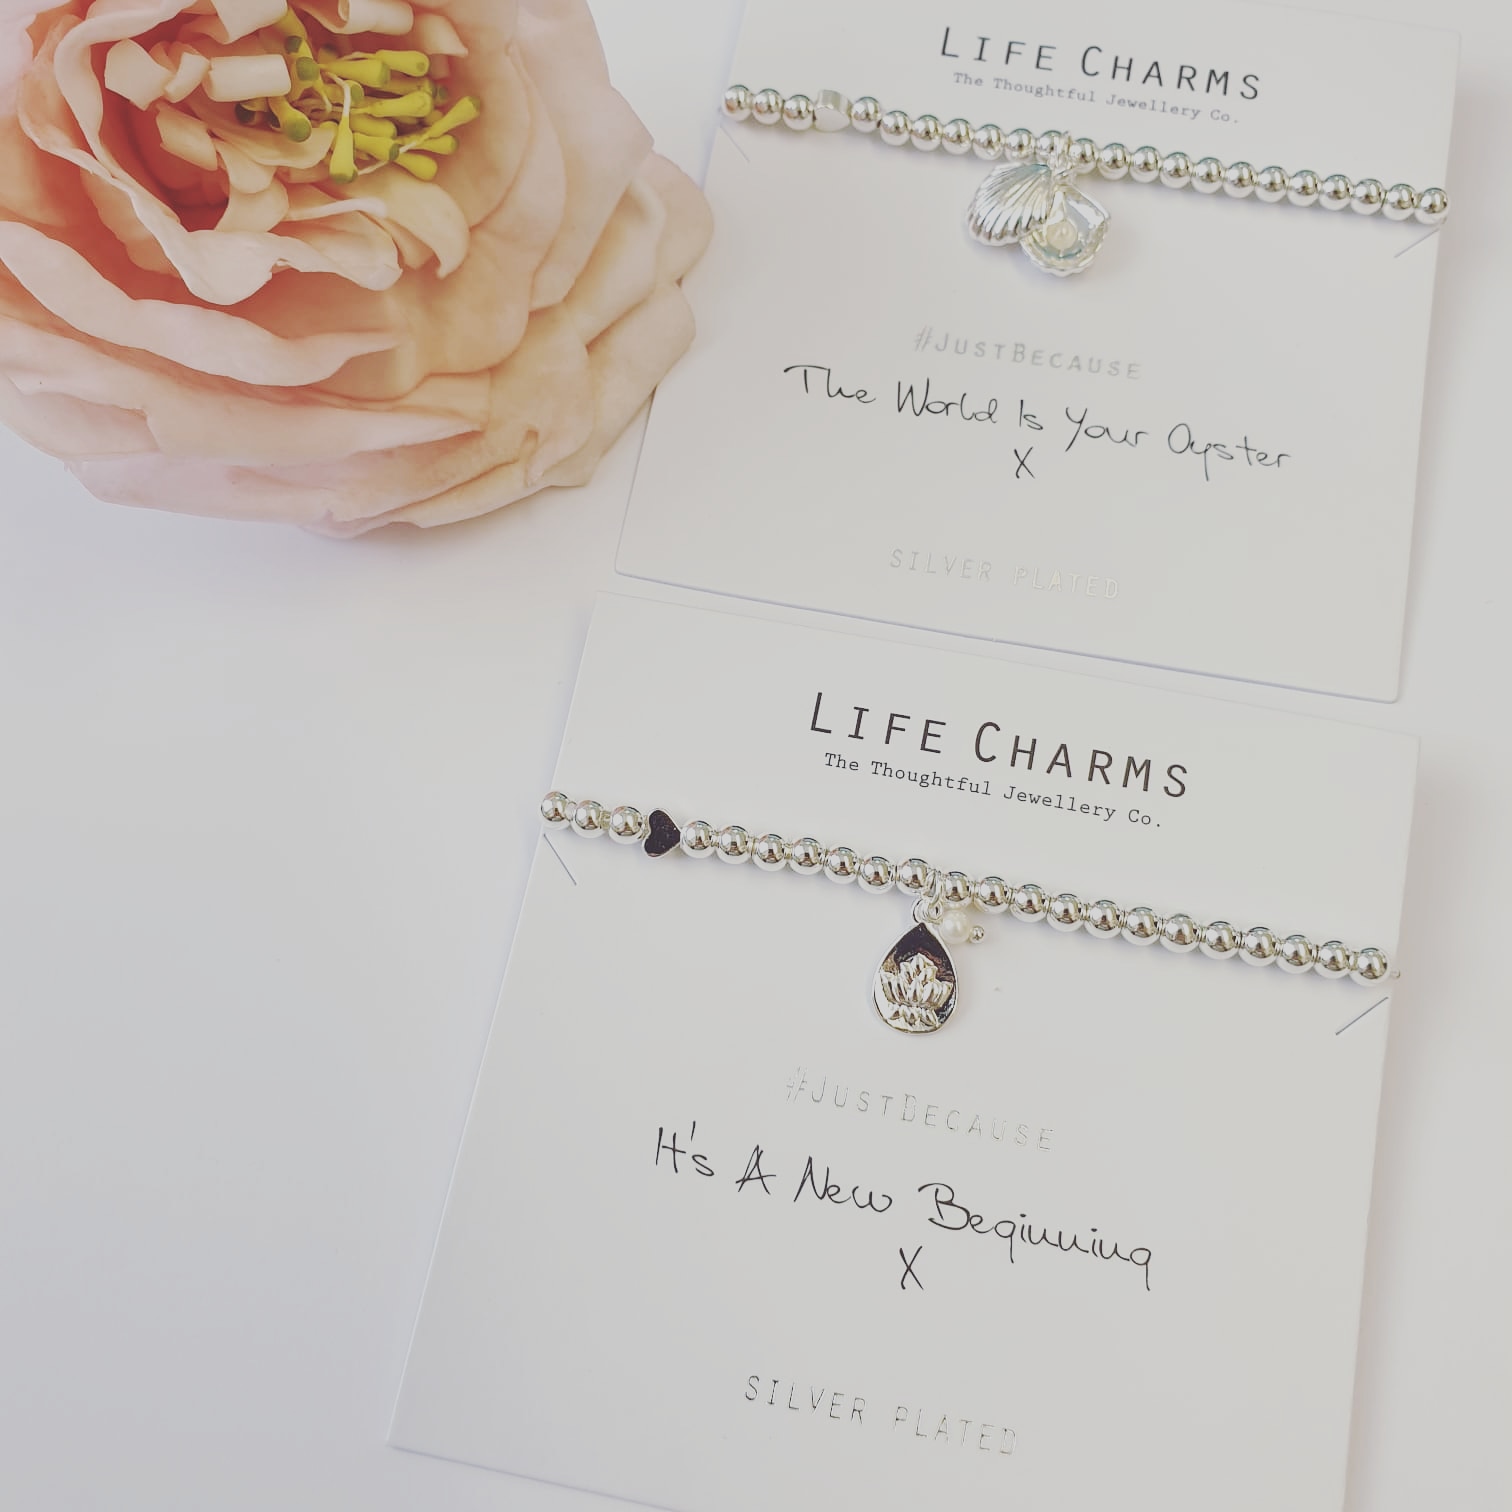 #JustBecause - Life Charms